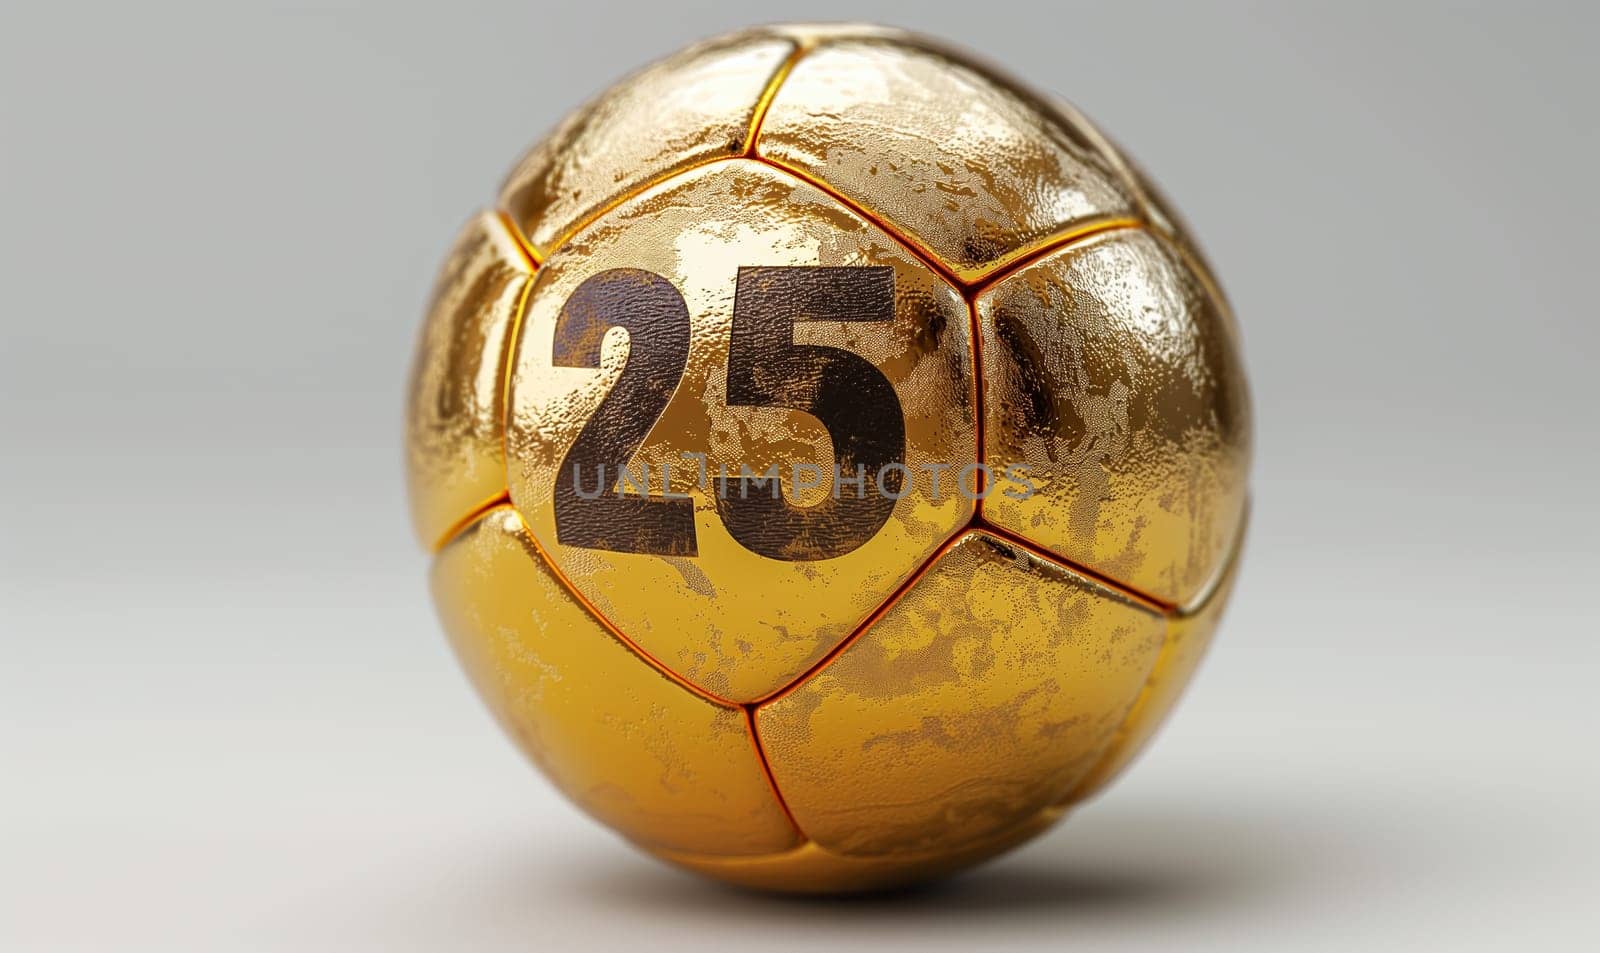 Golden ball with a number 25 on a white background. by Fischeron